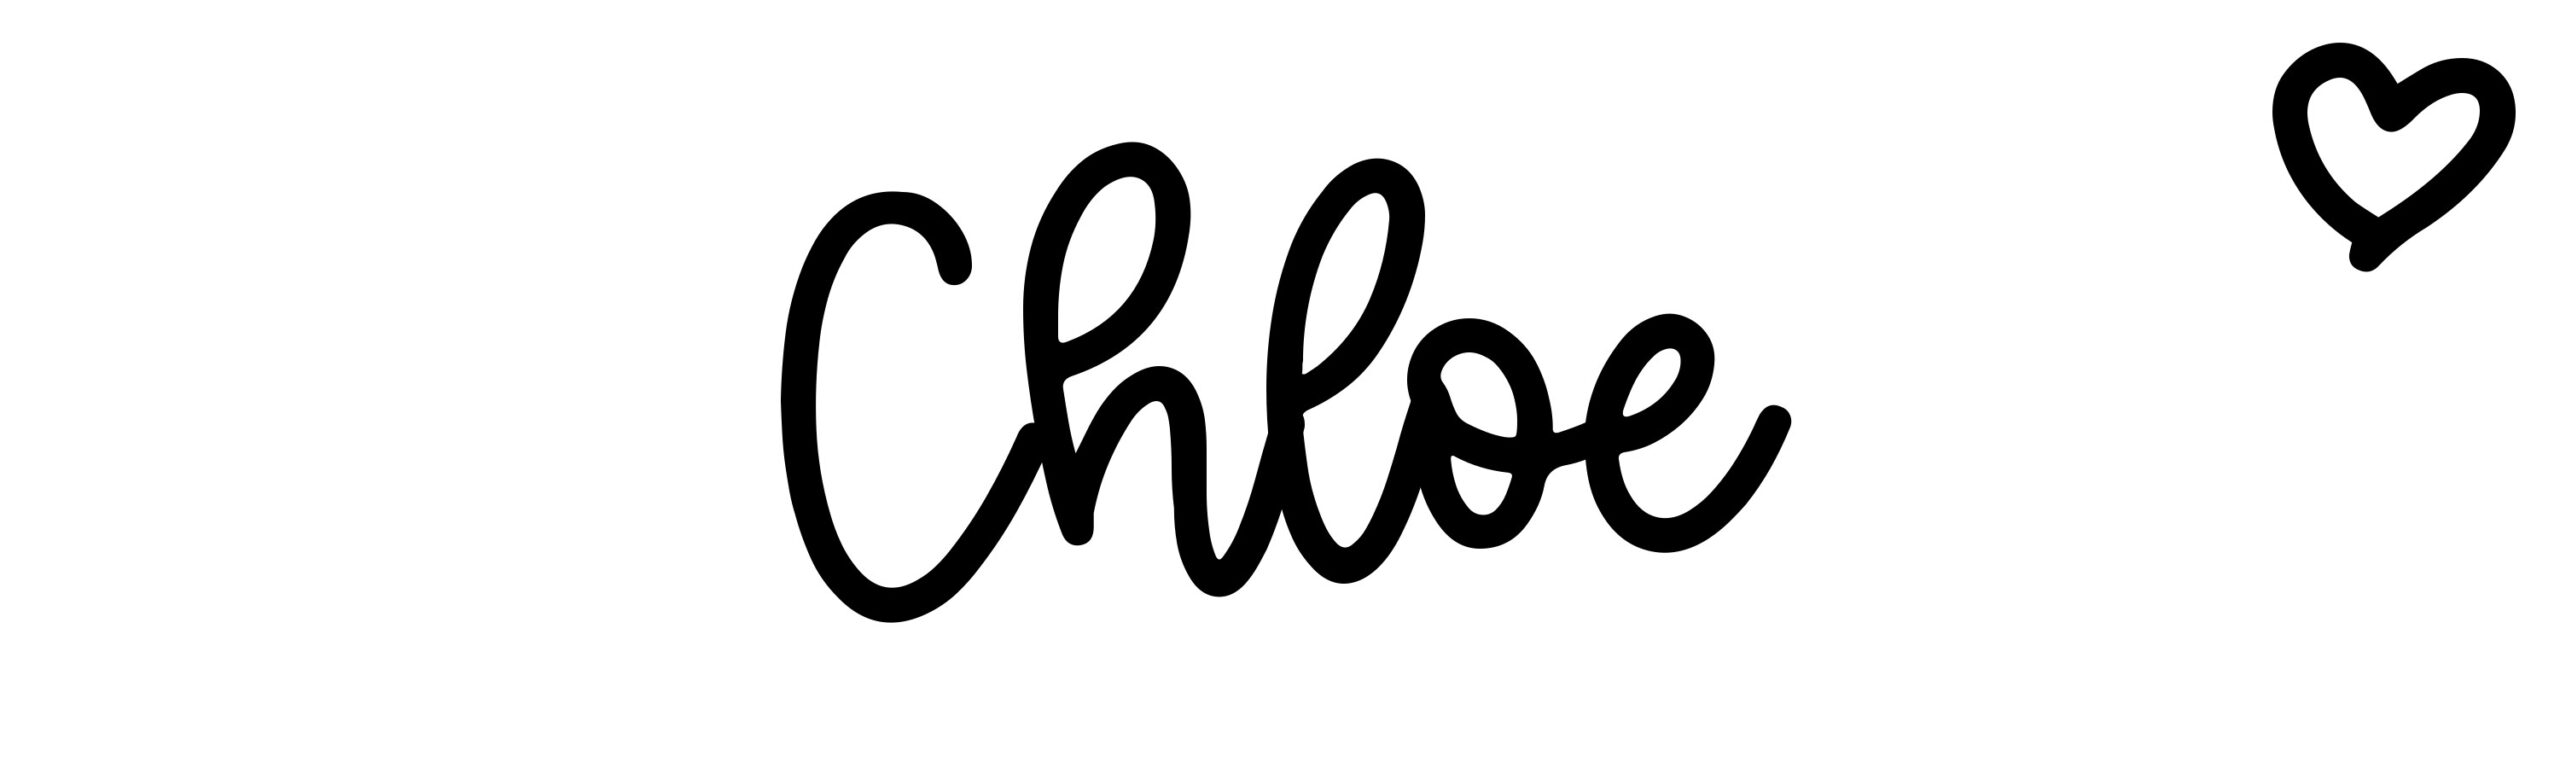 Chloe - Name meaning, origin, variations and more